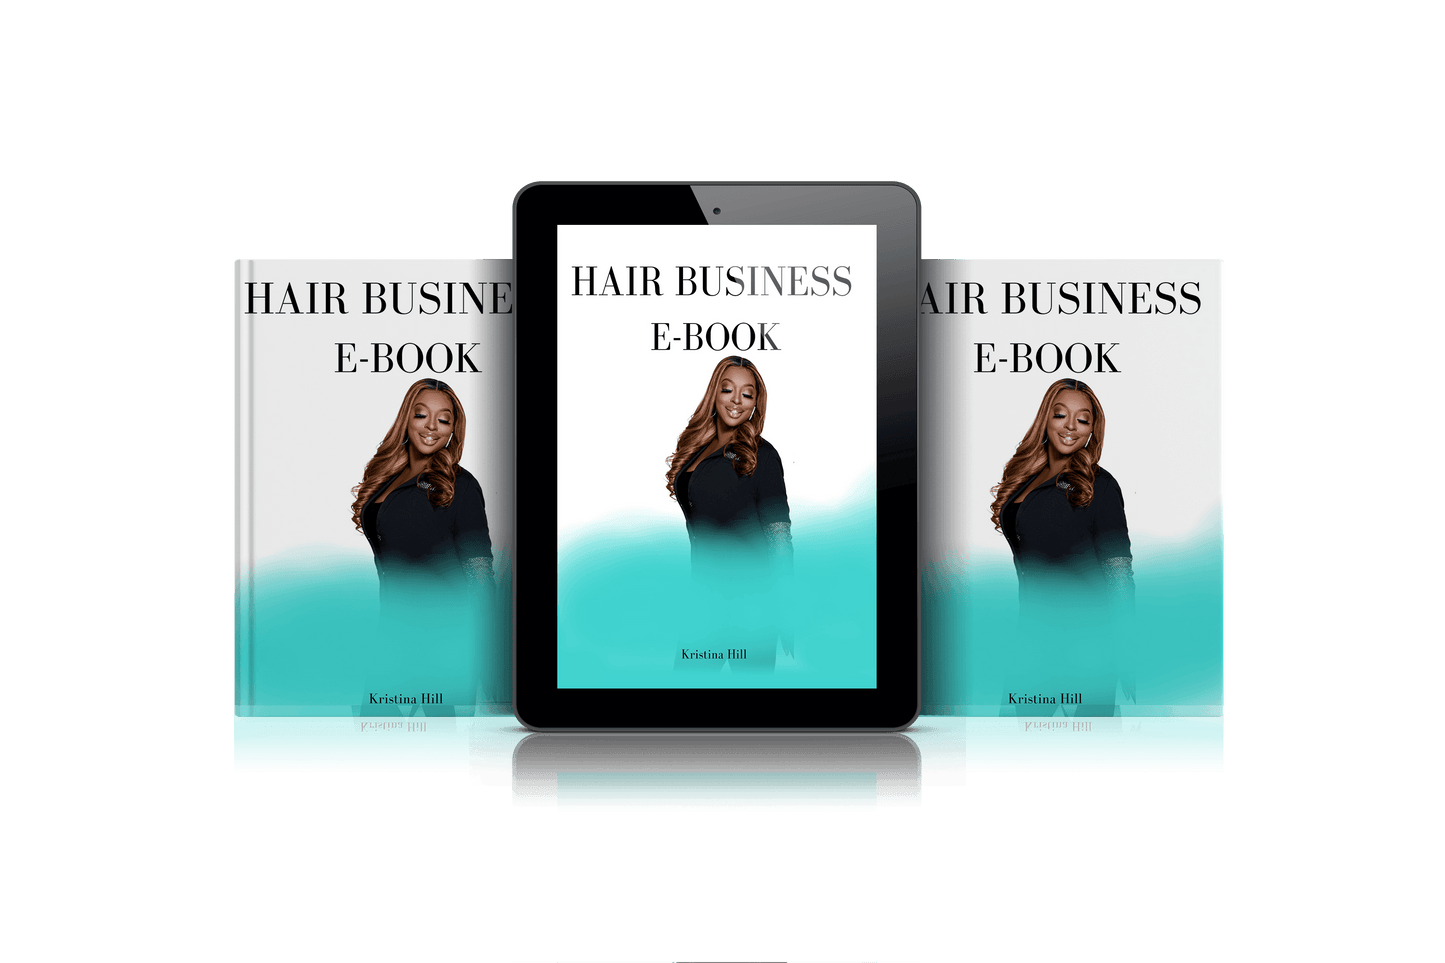 How To Get Into The Hair Business E-Book - Foreign Strandz Hair Co.